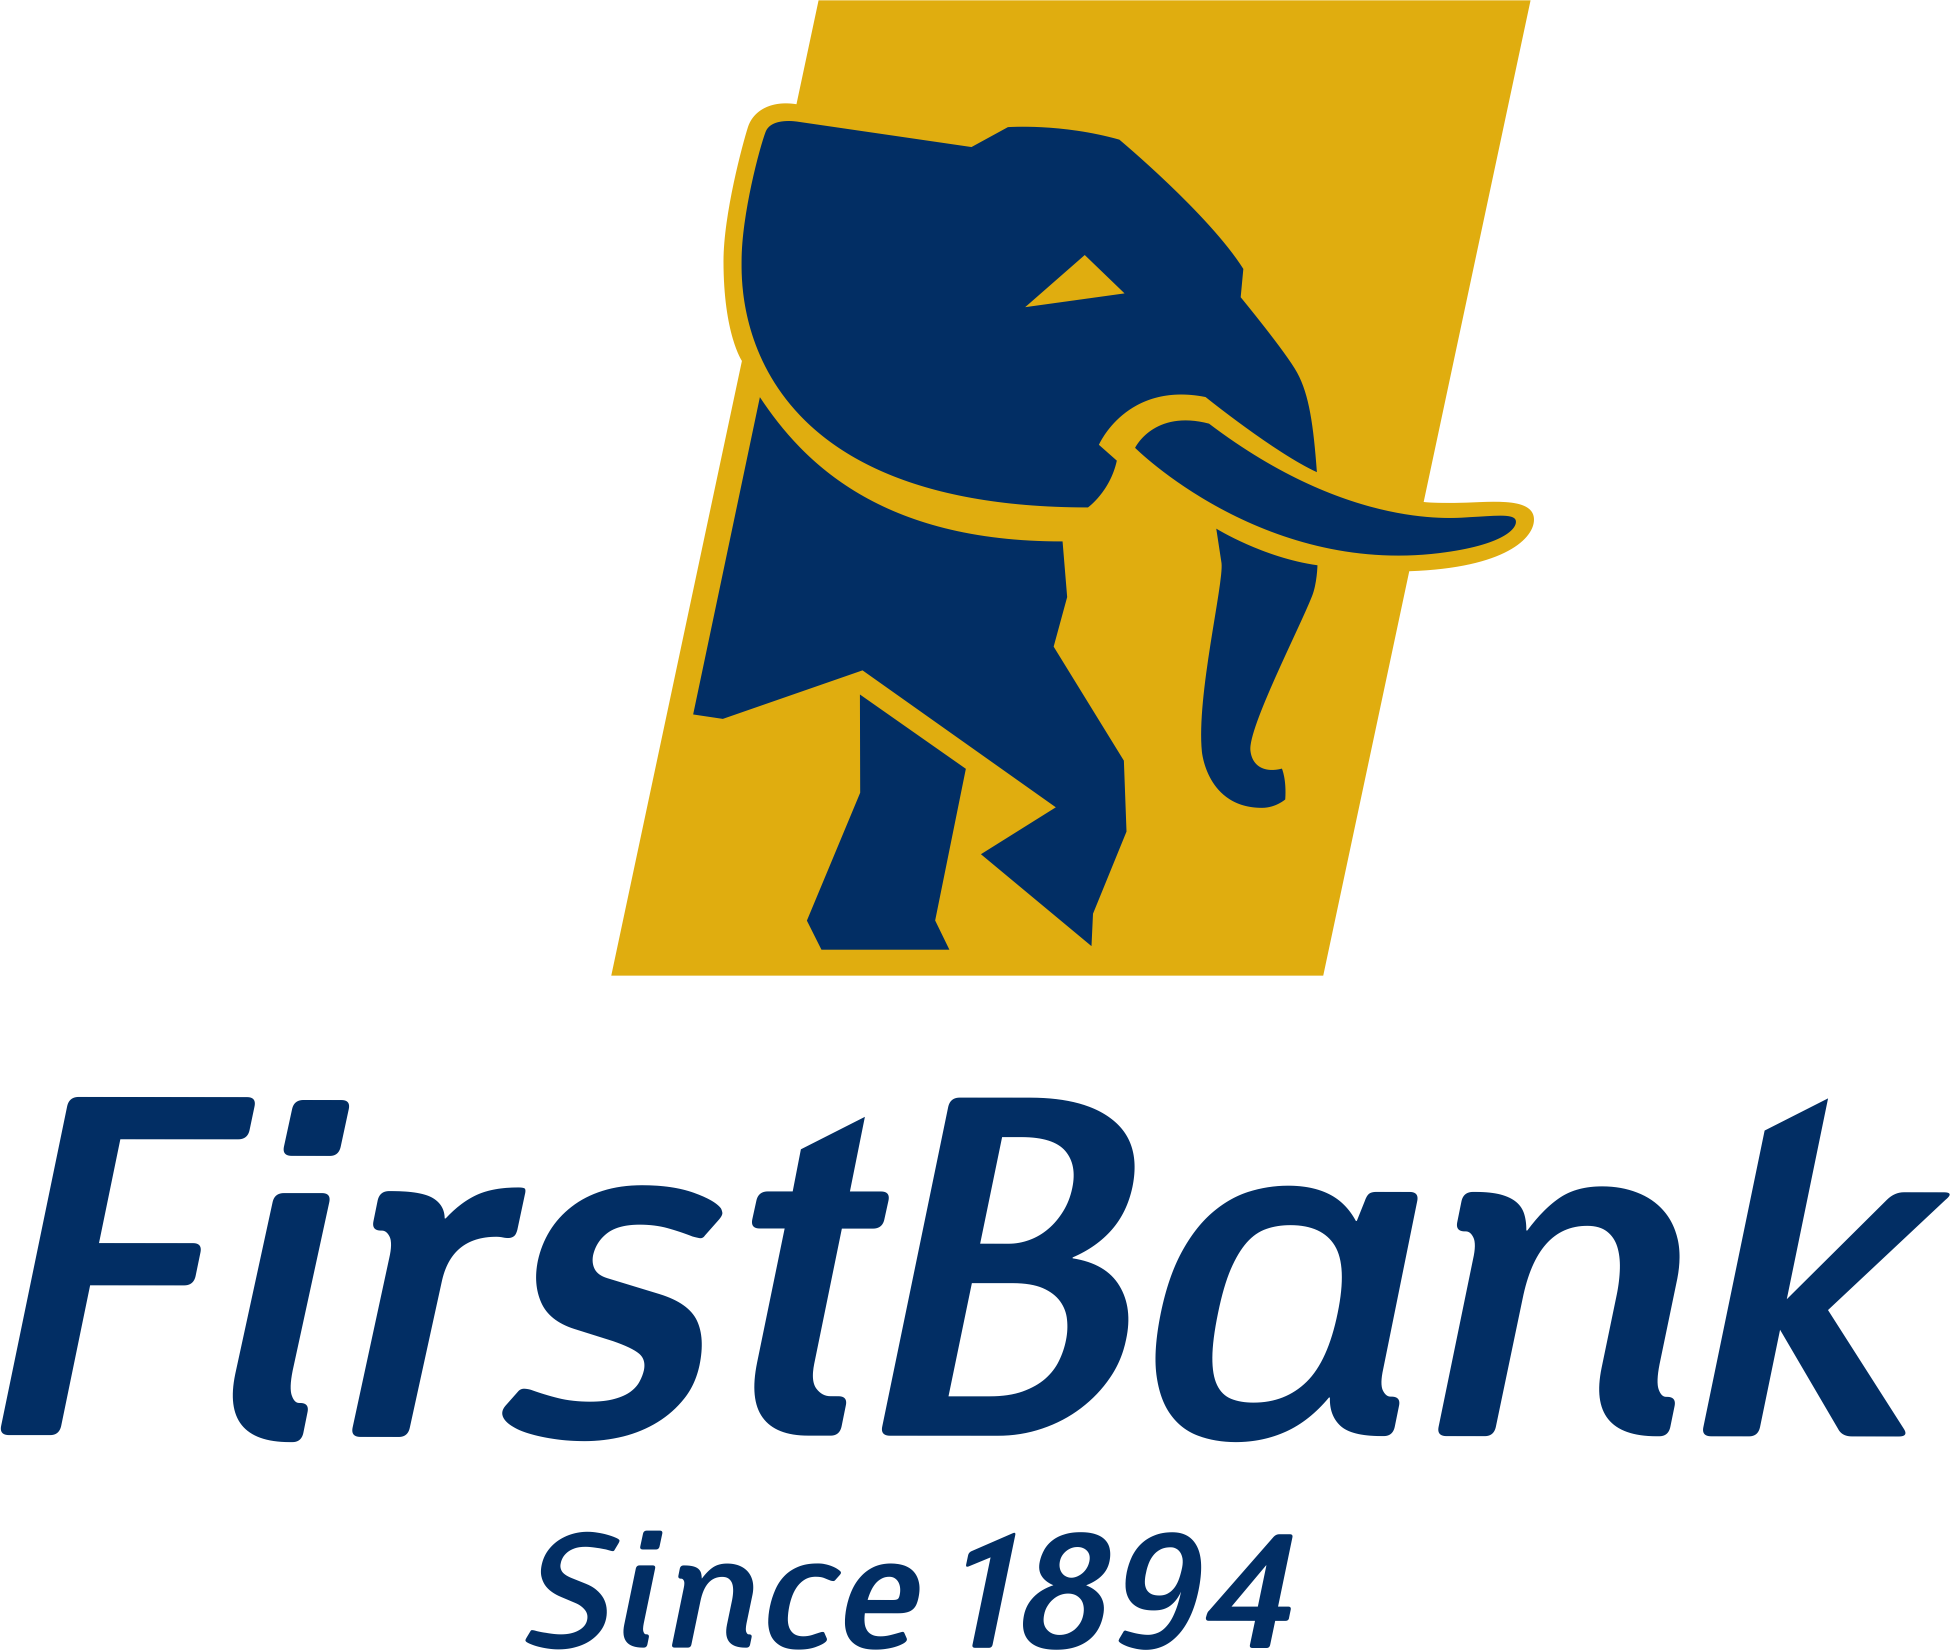 FIRSTBANK Rewards Customers With Prizes Worth 50 Million Naira In Verve Card Campaign